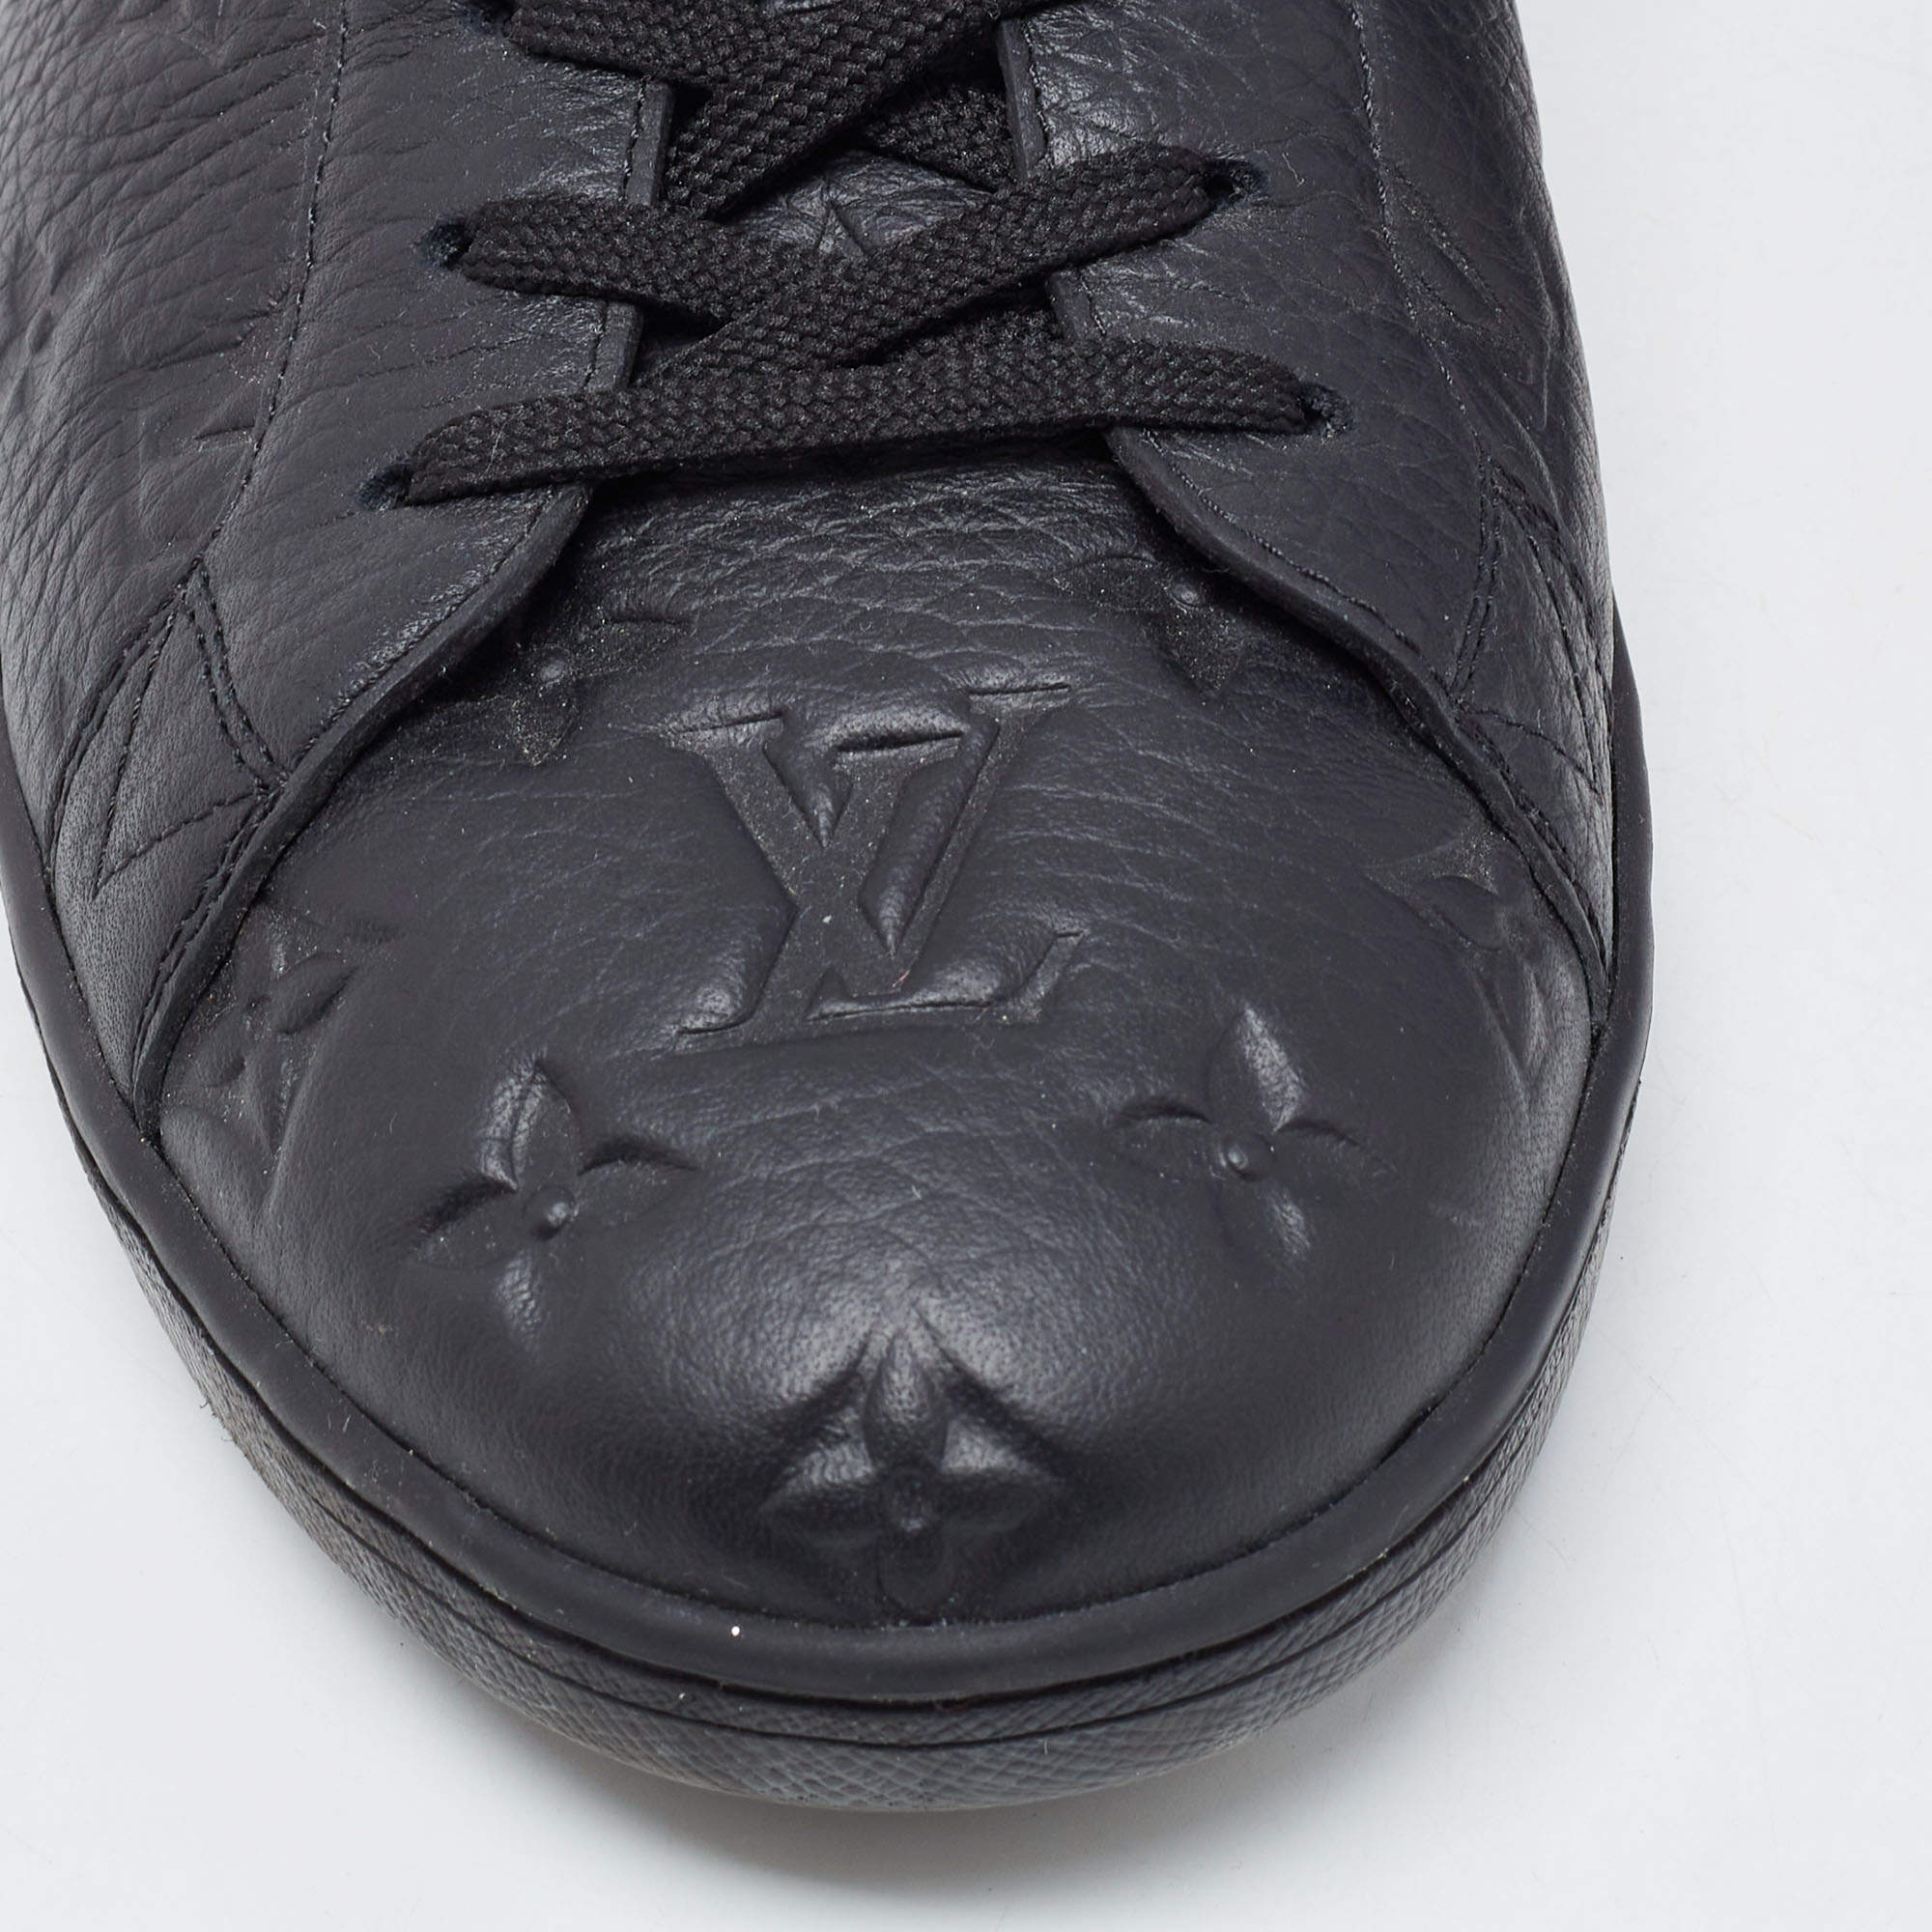 Luxembourg low trainers Louis Vuitton Black size 43 EU in Other - 36241919